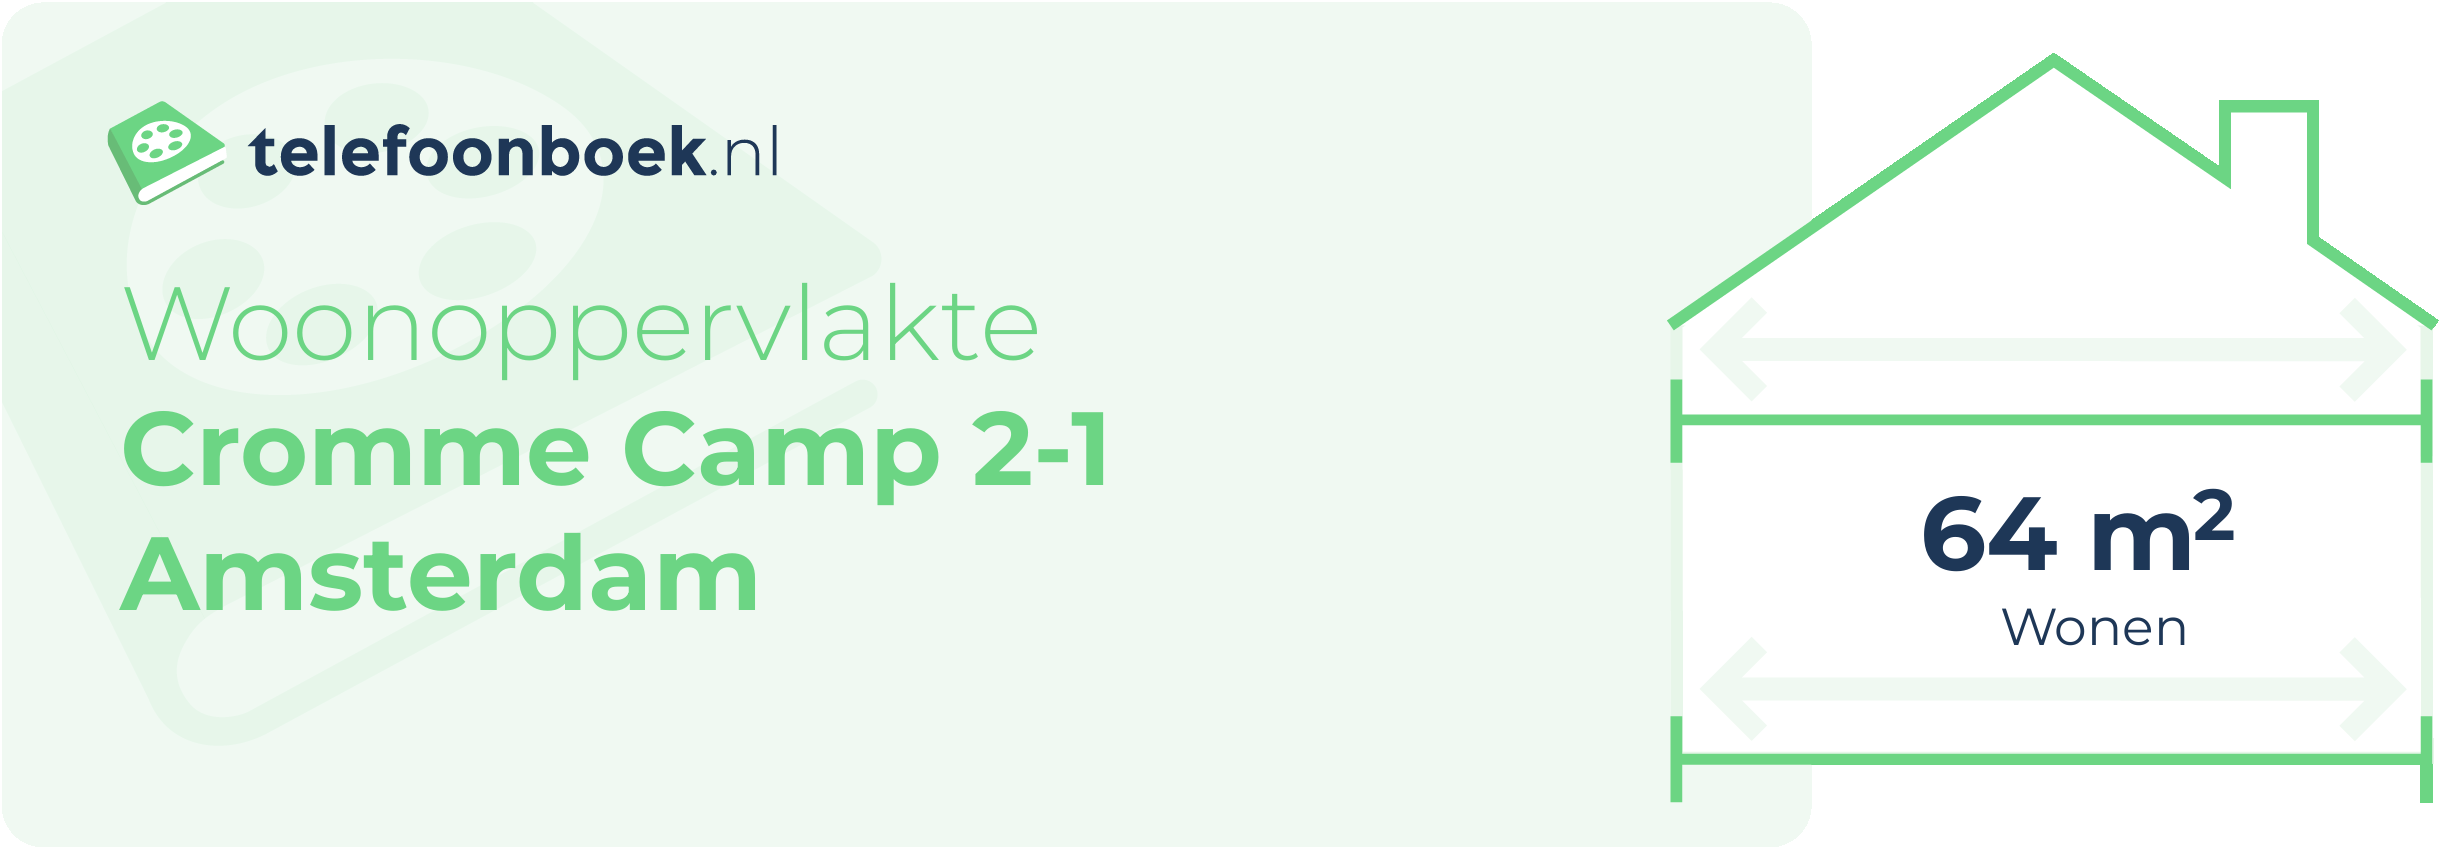 Woonoppervlakte Cromme Camp 2-1 Amsterdam